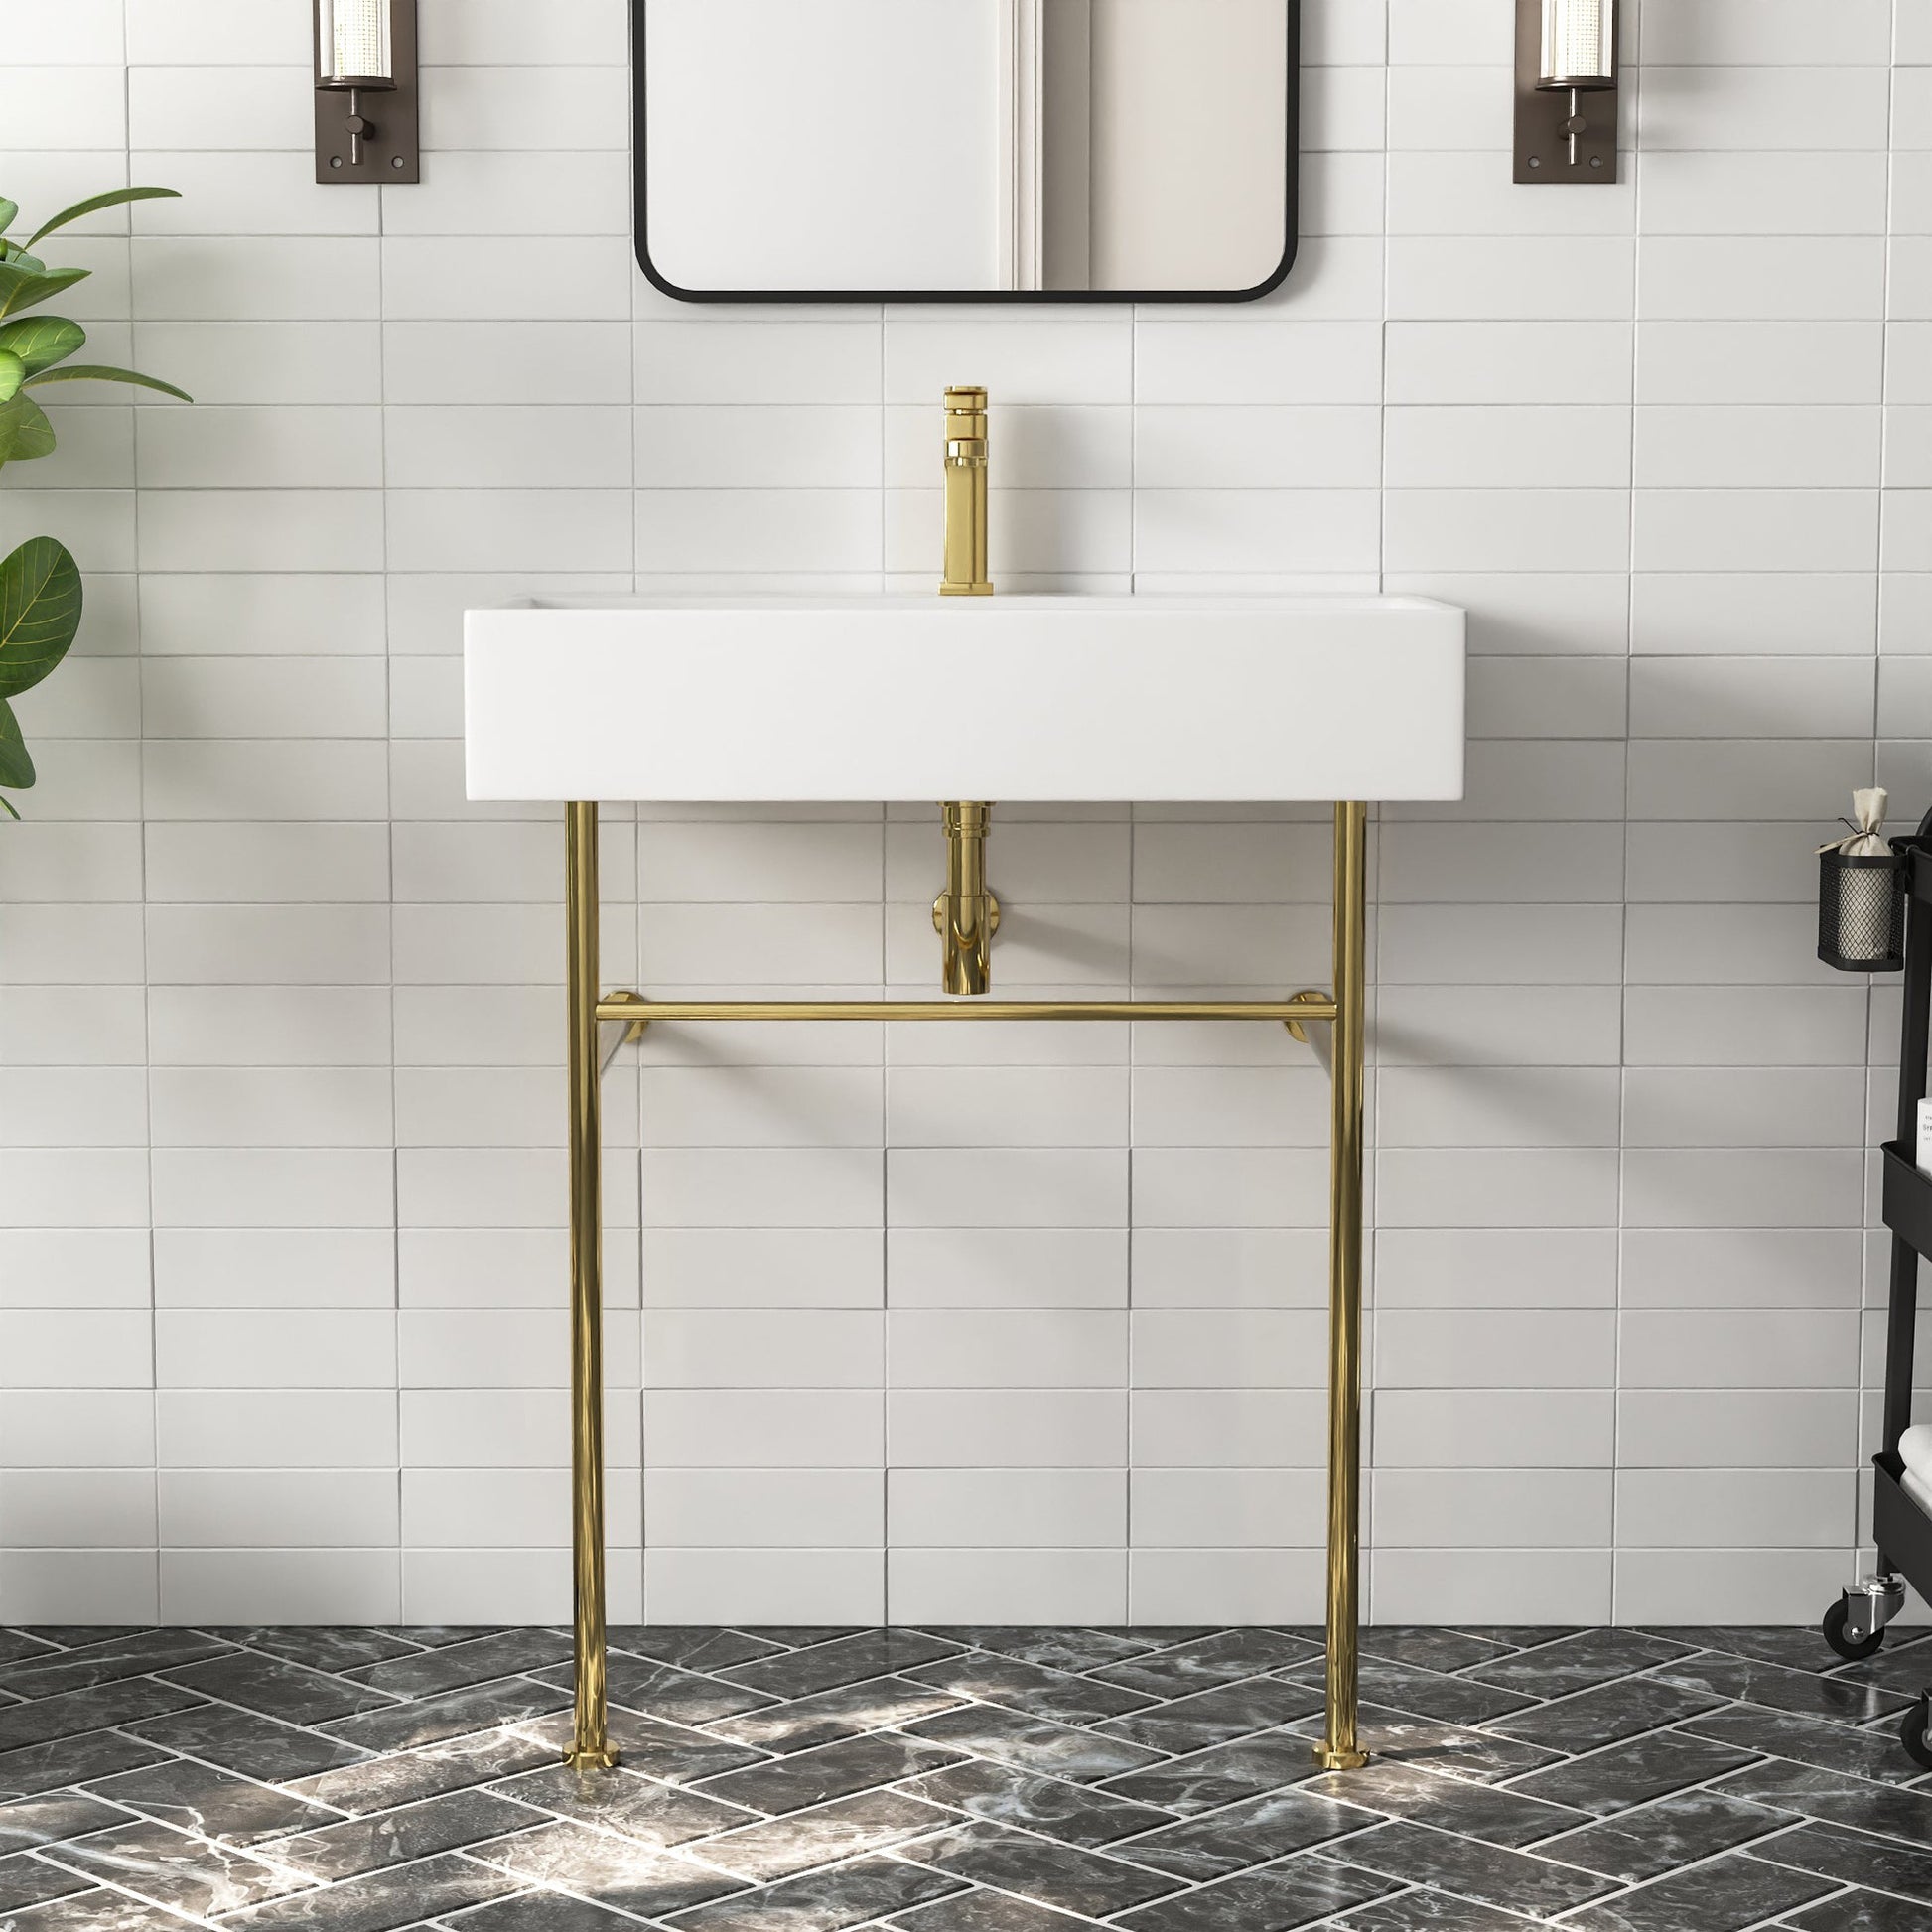 DeerValley 30" Rectangular White Ceramic Console Bathroom Sink With Gold Legs and Single Faucet Hole